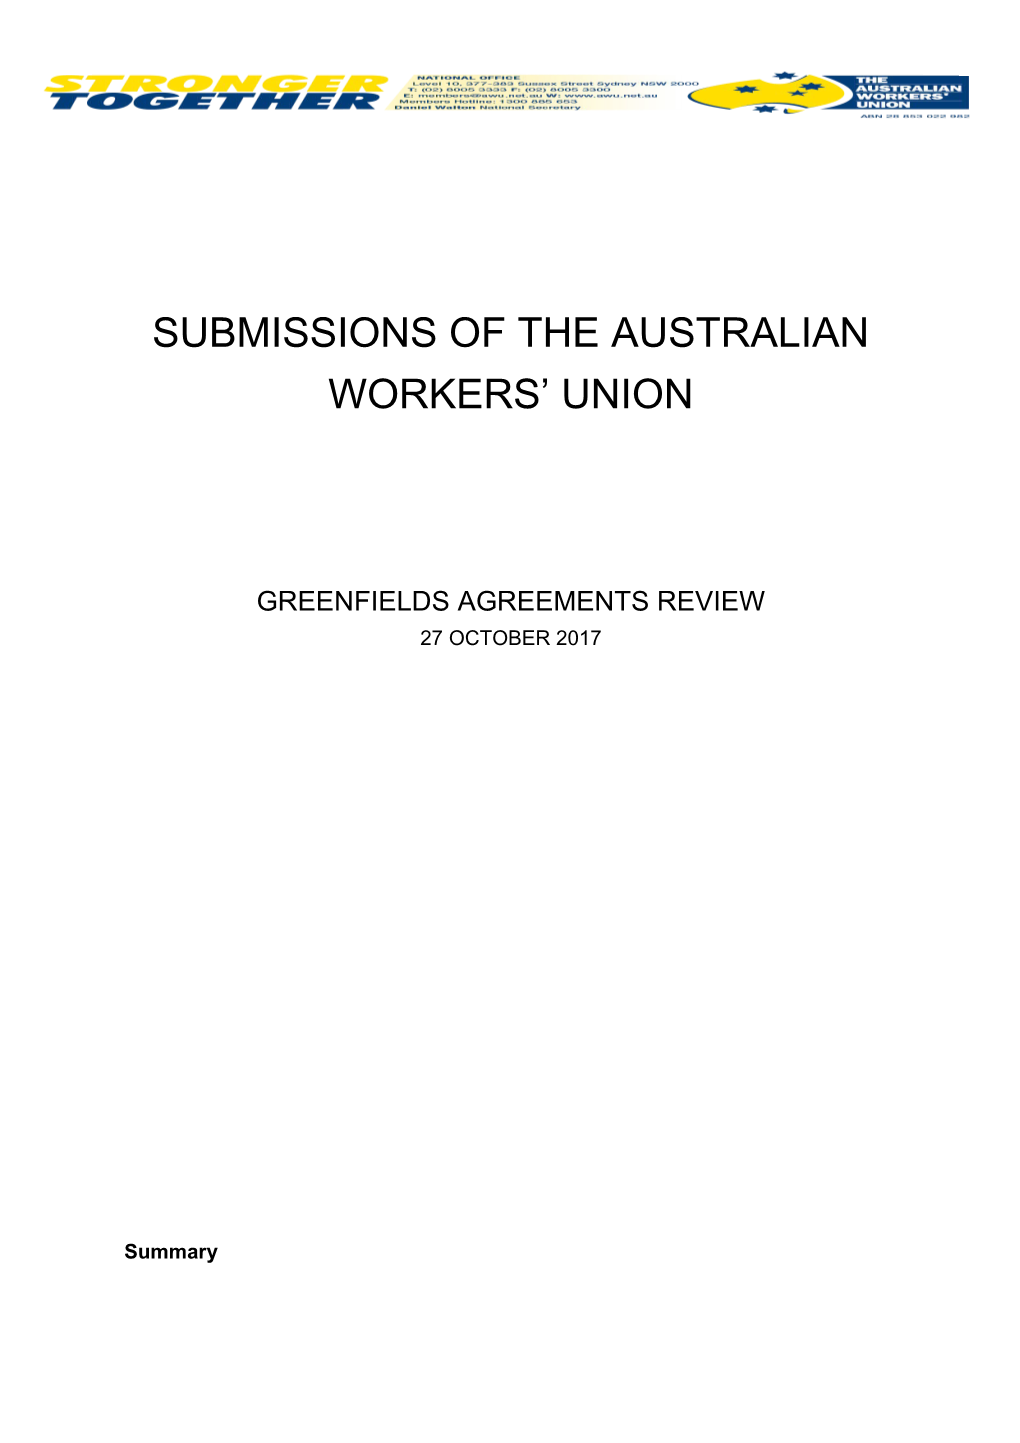 Submissions of the Australian Workers Union